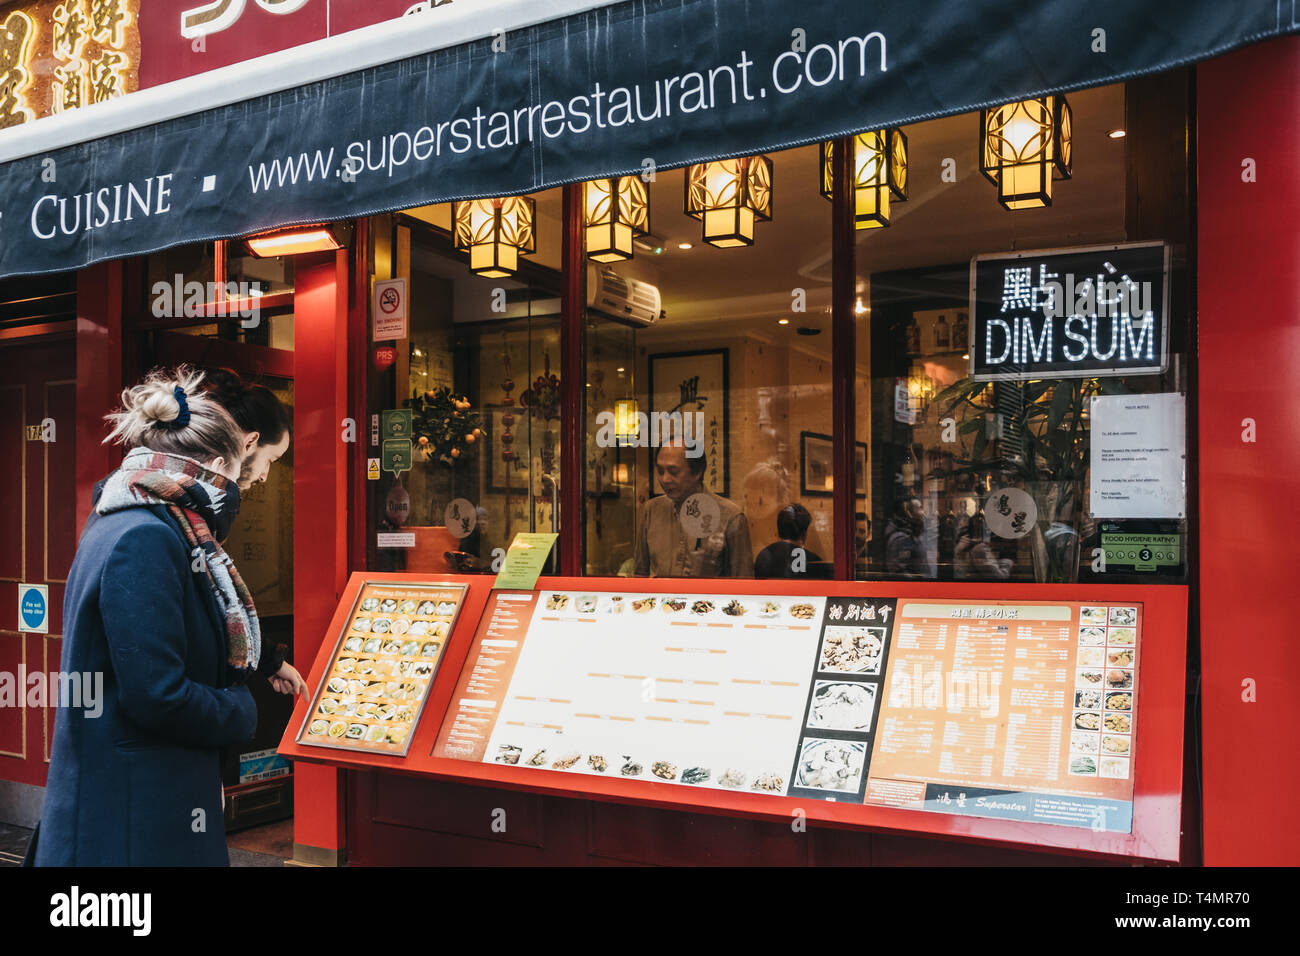 London, UK - April 13, 2019: People standing and reading a menu outside a restaurant in Chinatown, London. Chinatown is home to a large East Asian com Stock Photo